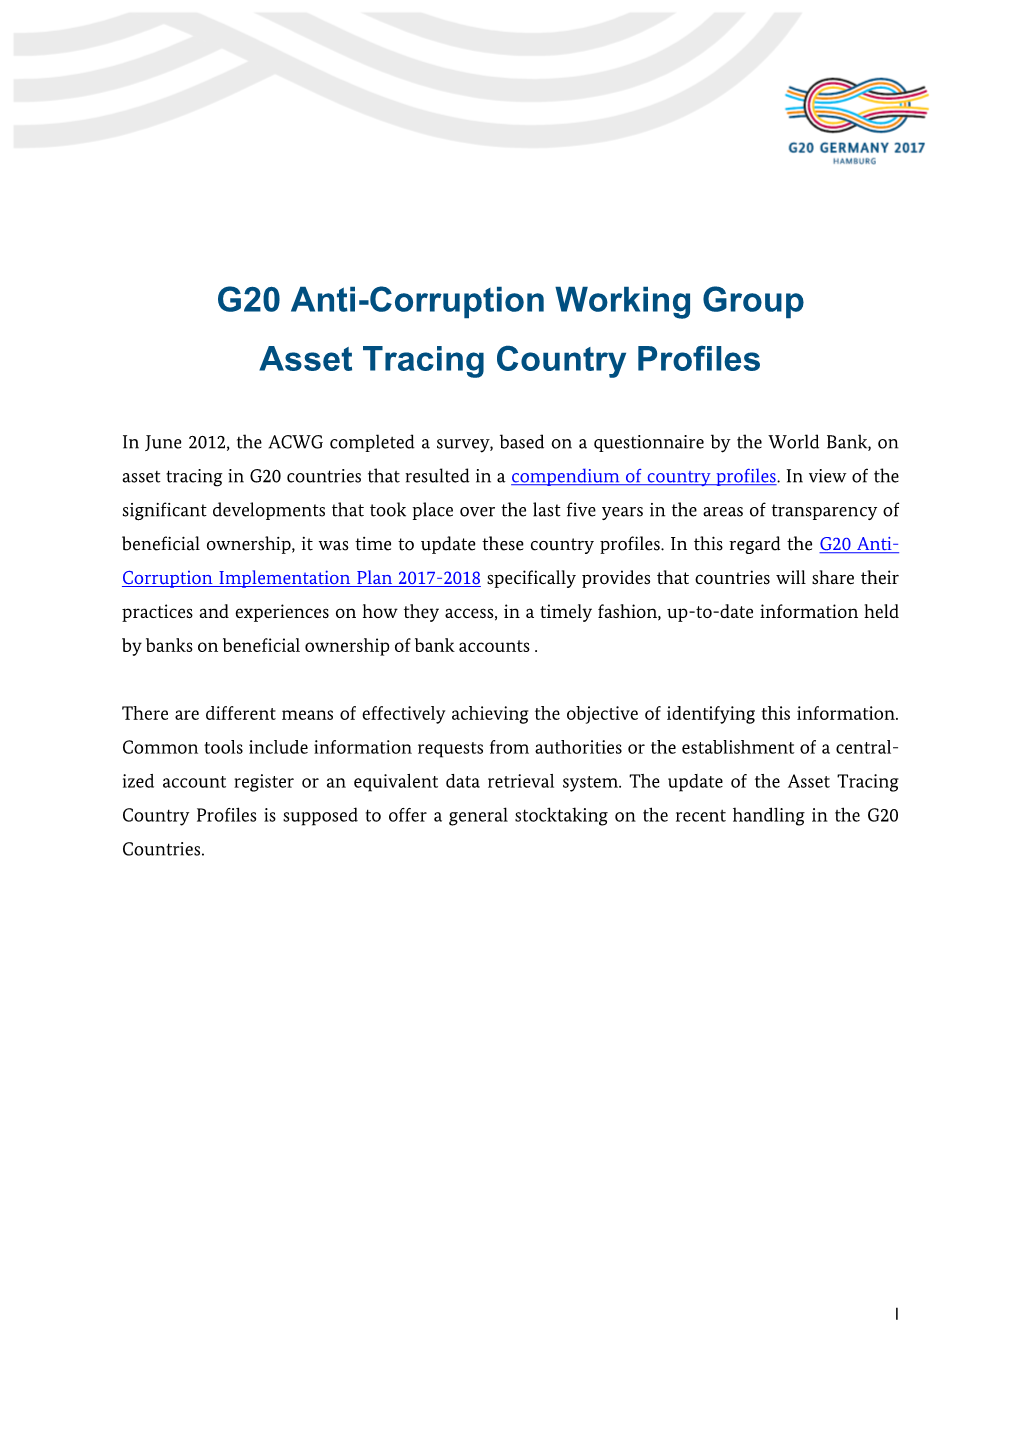 G20 Anti-Corruption Working Group Asset Tracing Country Profiles